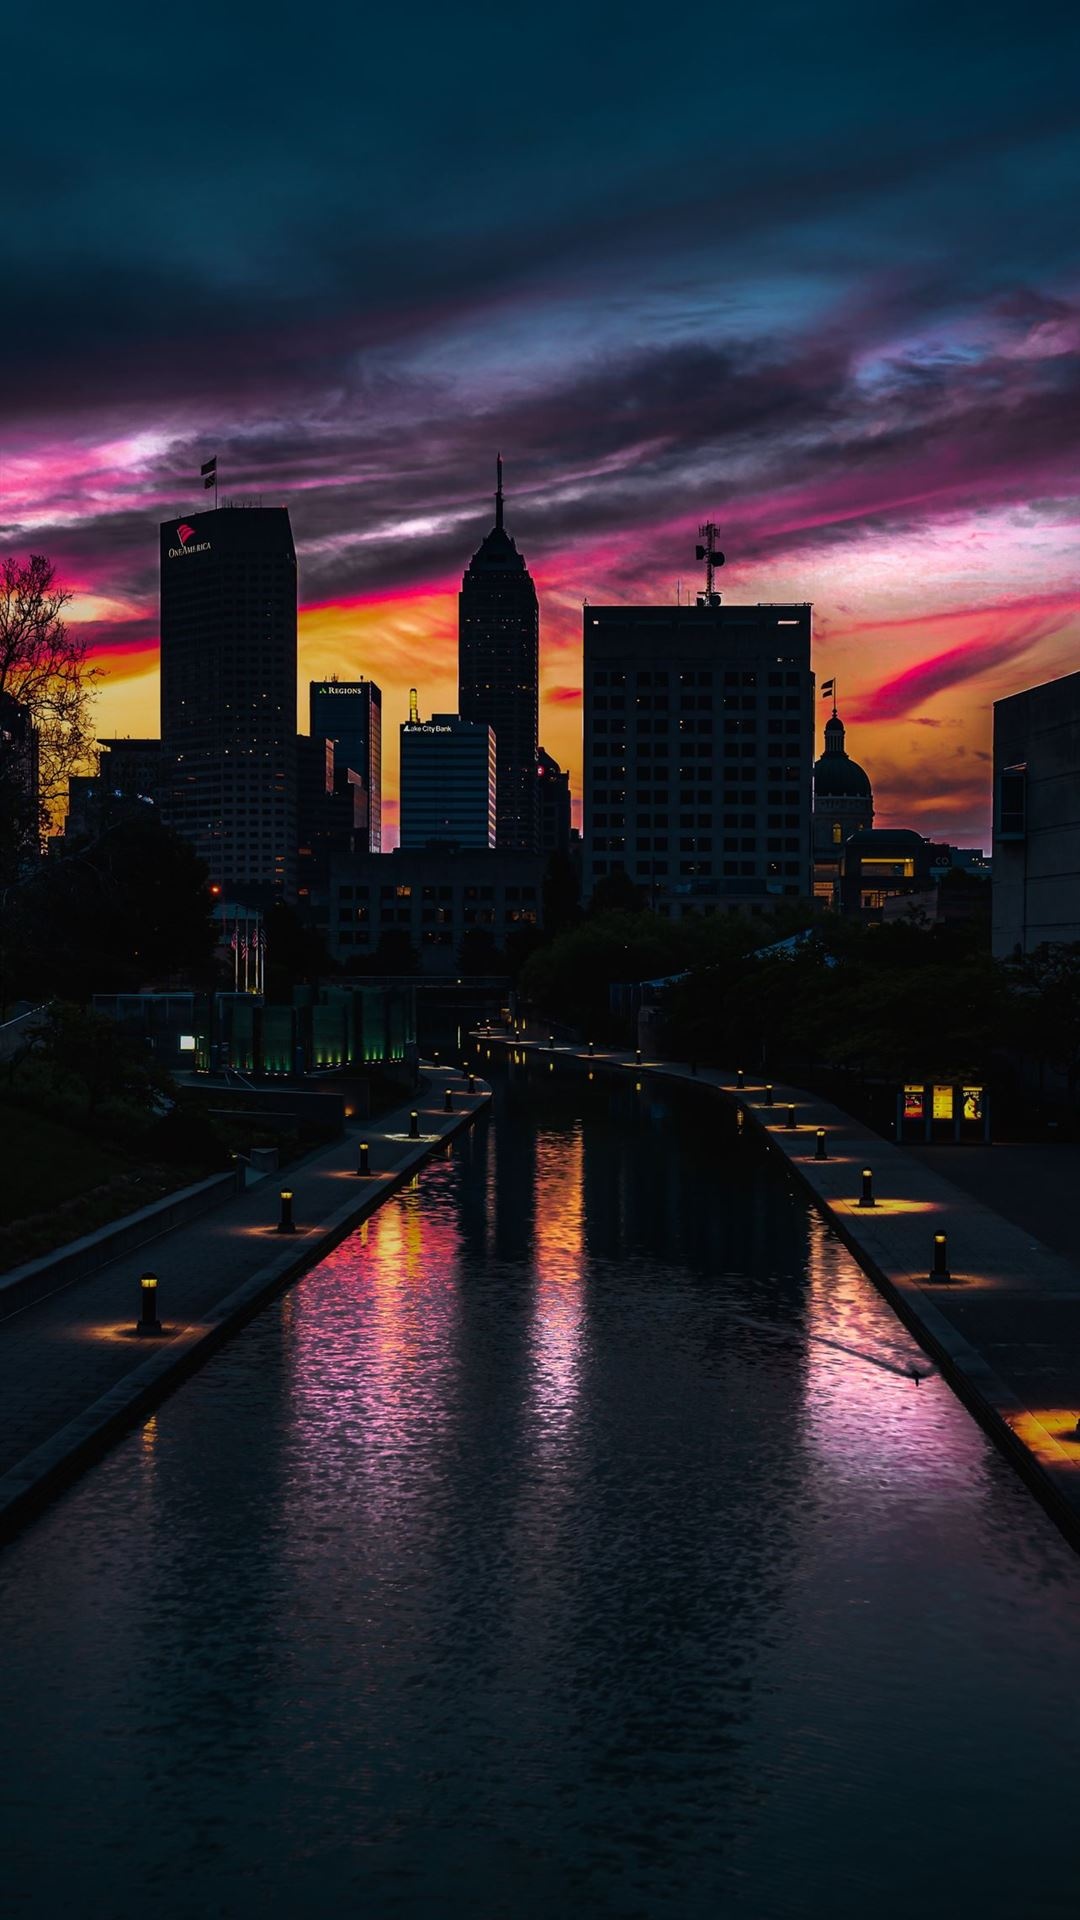 Indianapolis iPhone Wallpapers, Free Download, Mobile, Backgrounds, 1080x1920 Full HD Handy